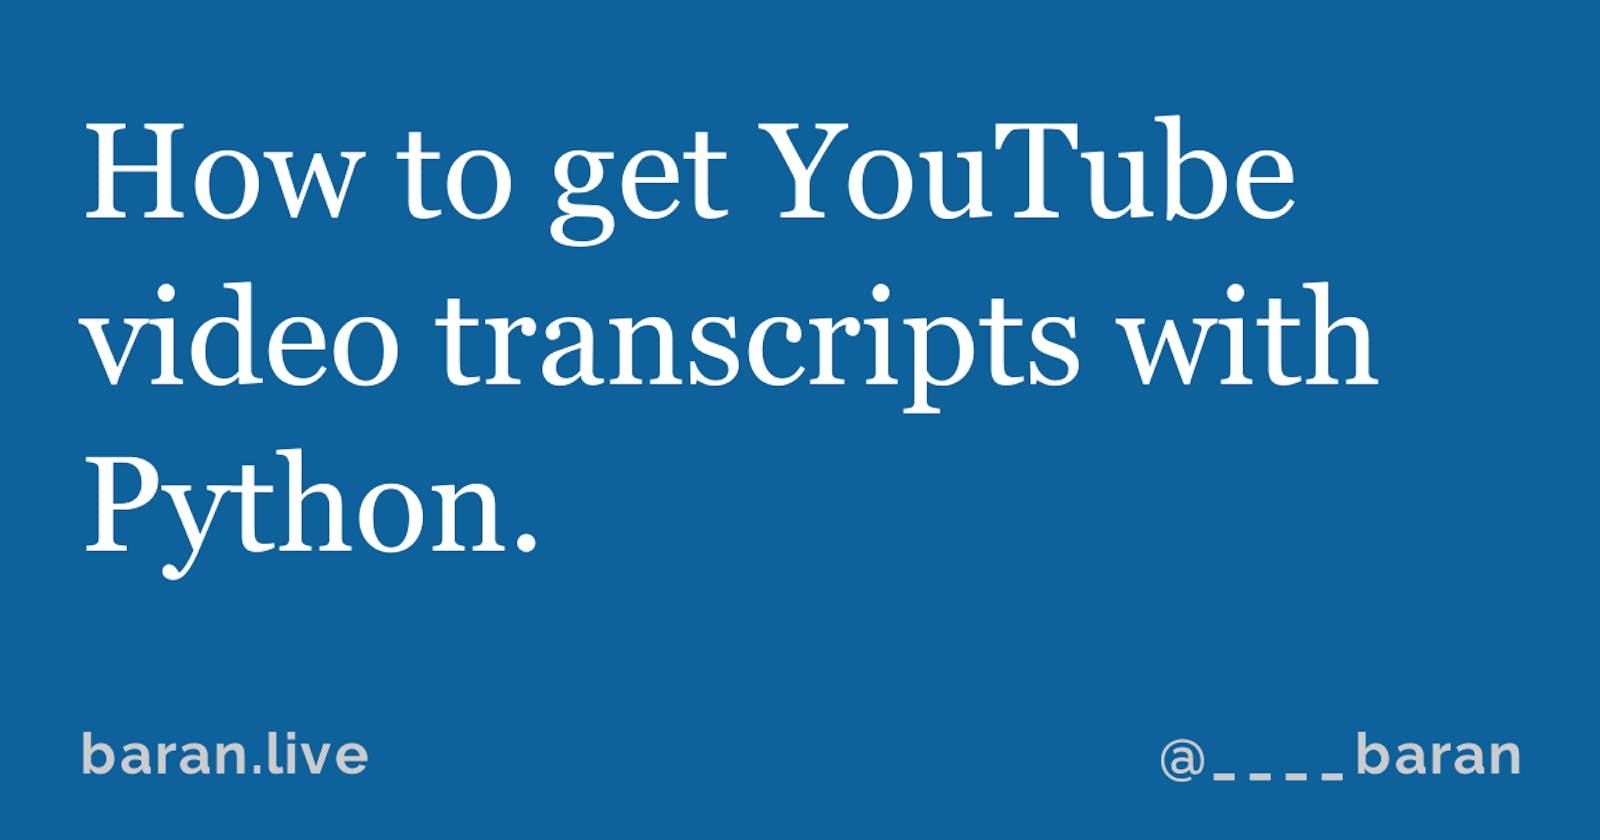 How to get YouTube video transcripts with Python